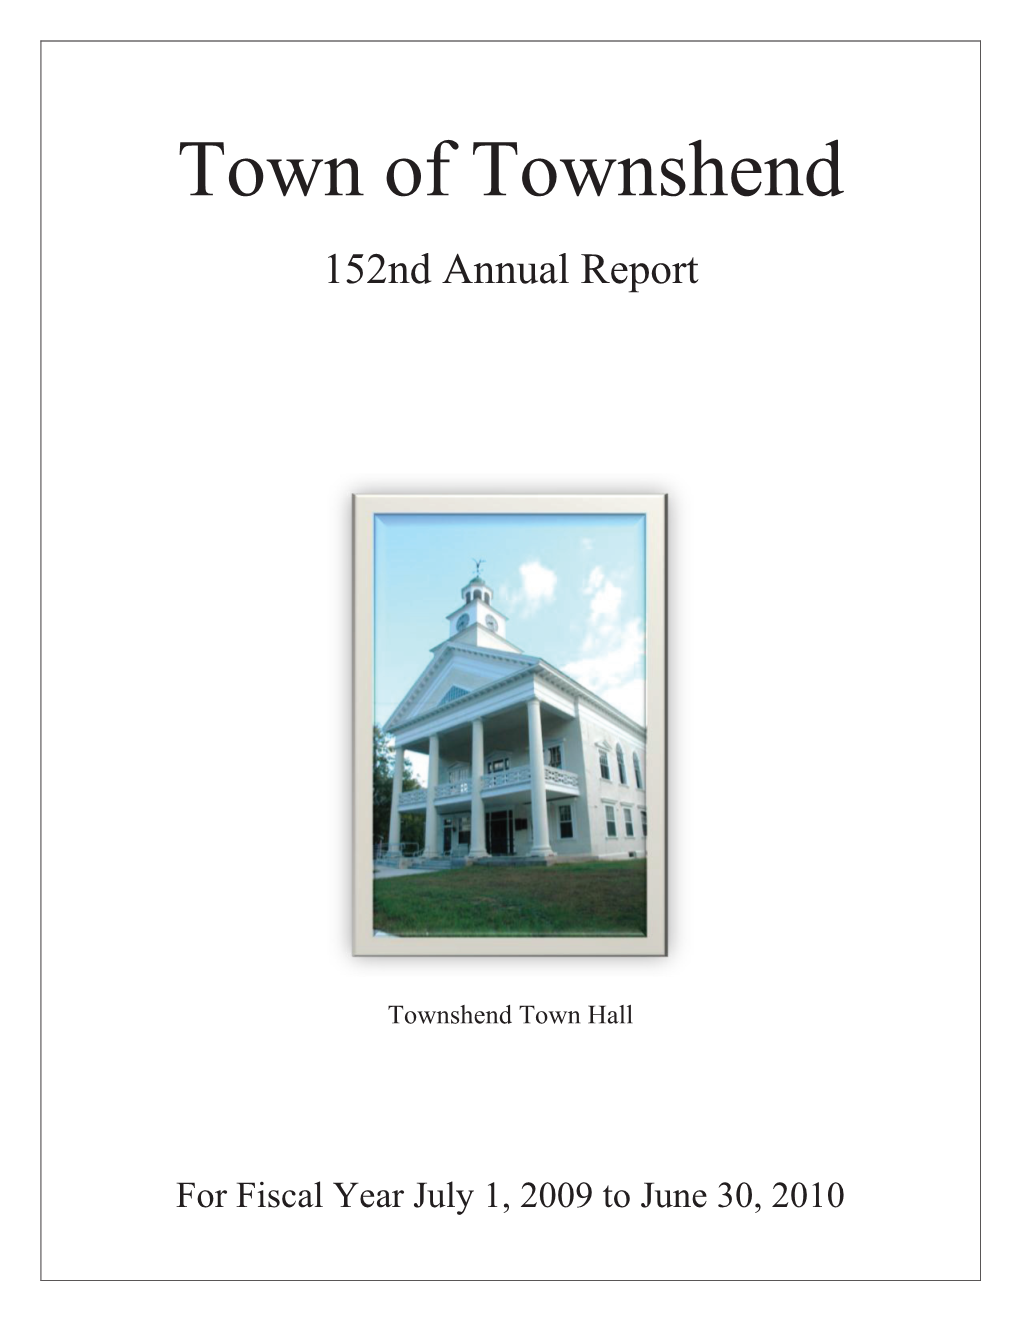 Town of Townshend 152Nd Annual Report